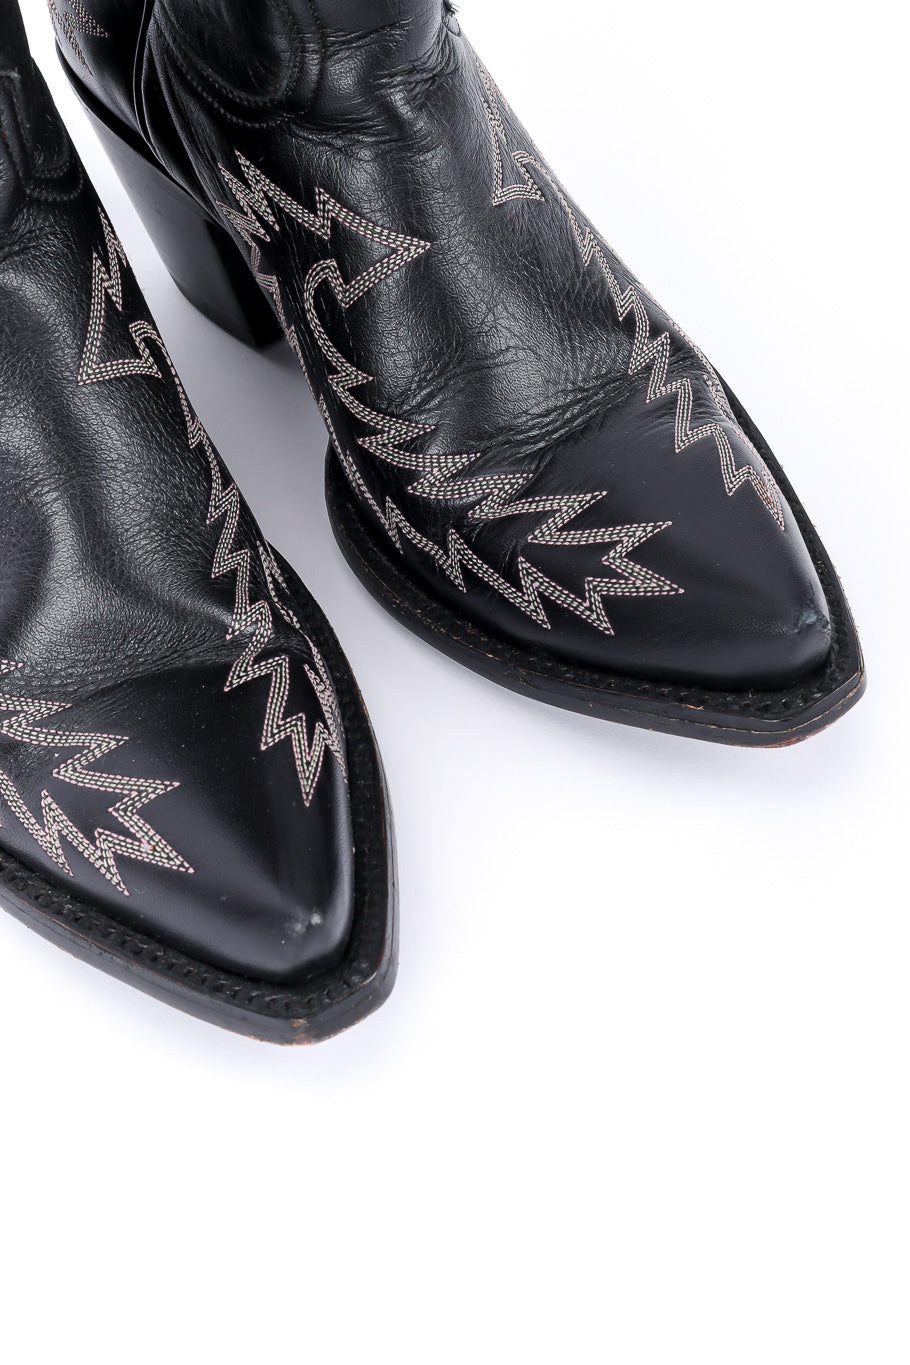 Liberty Boot Co. Kiss My Axe Western Boots top view of pointed to on white backdrop @Recessla